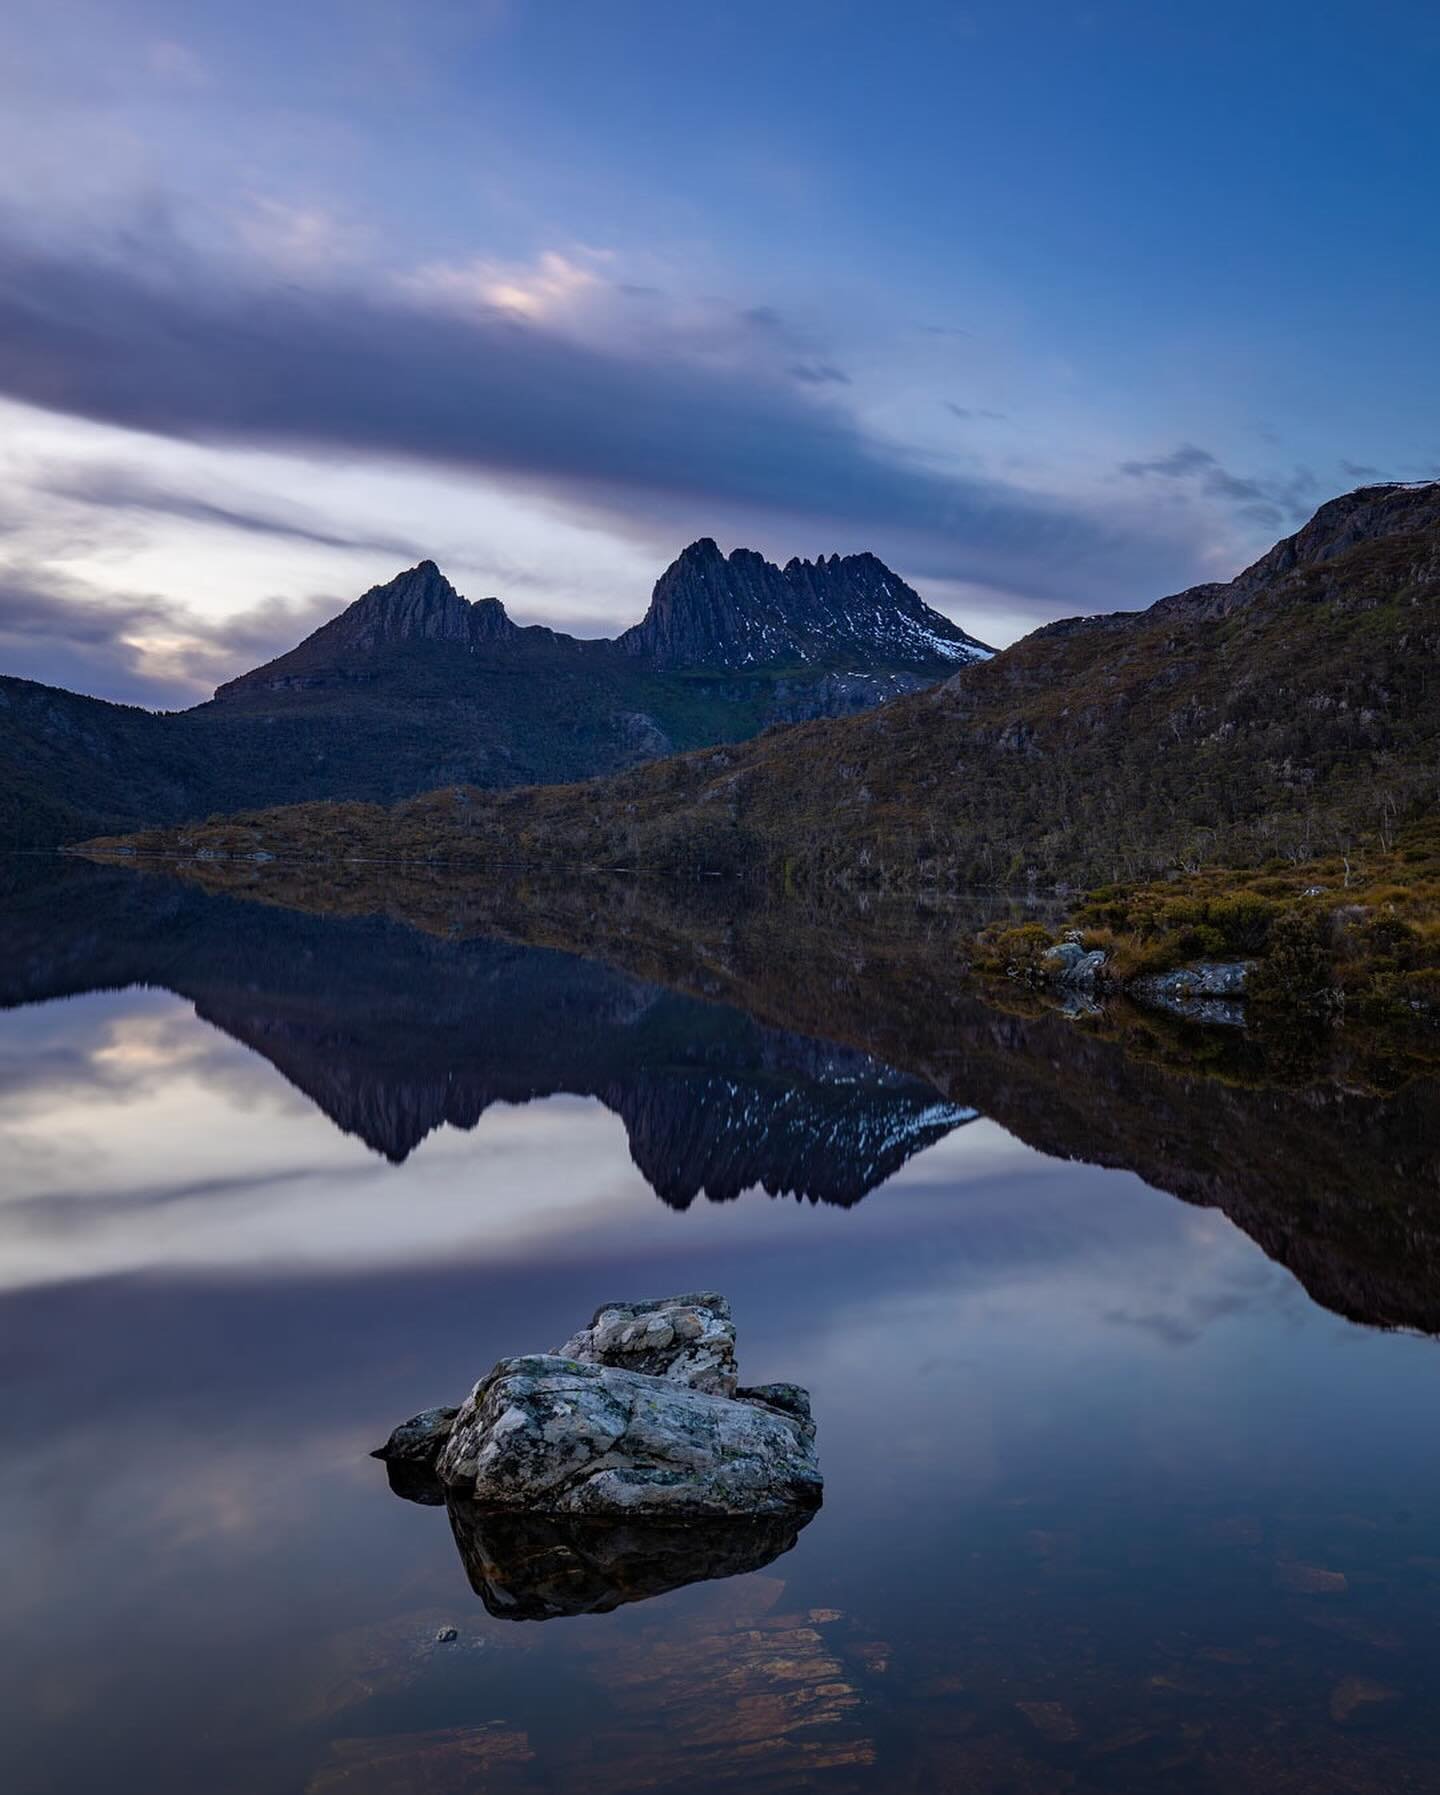 I just had to share more images from Cradle Mountain&hellip;.a photographer&rsquo;s paradise! (and by the way, all the images in this post were taken in one session). Come along with me in November on my West Coast + Cradle tour and I can show you ar